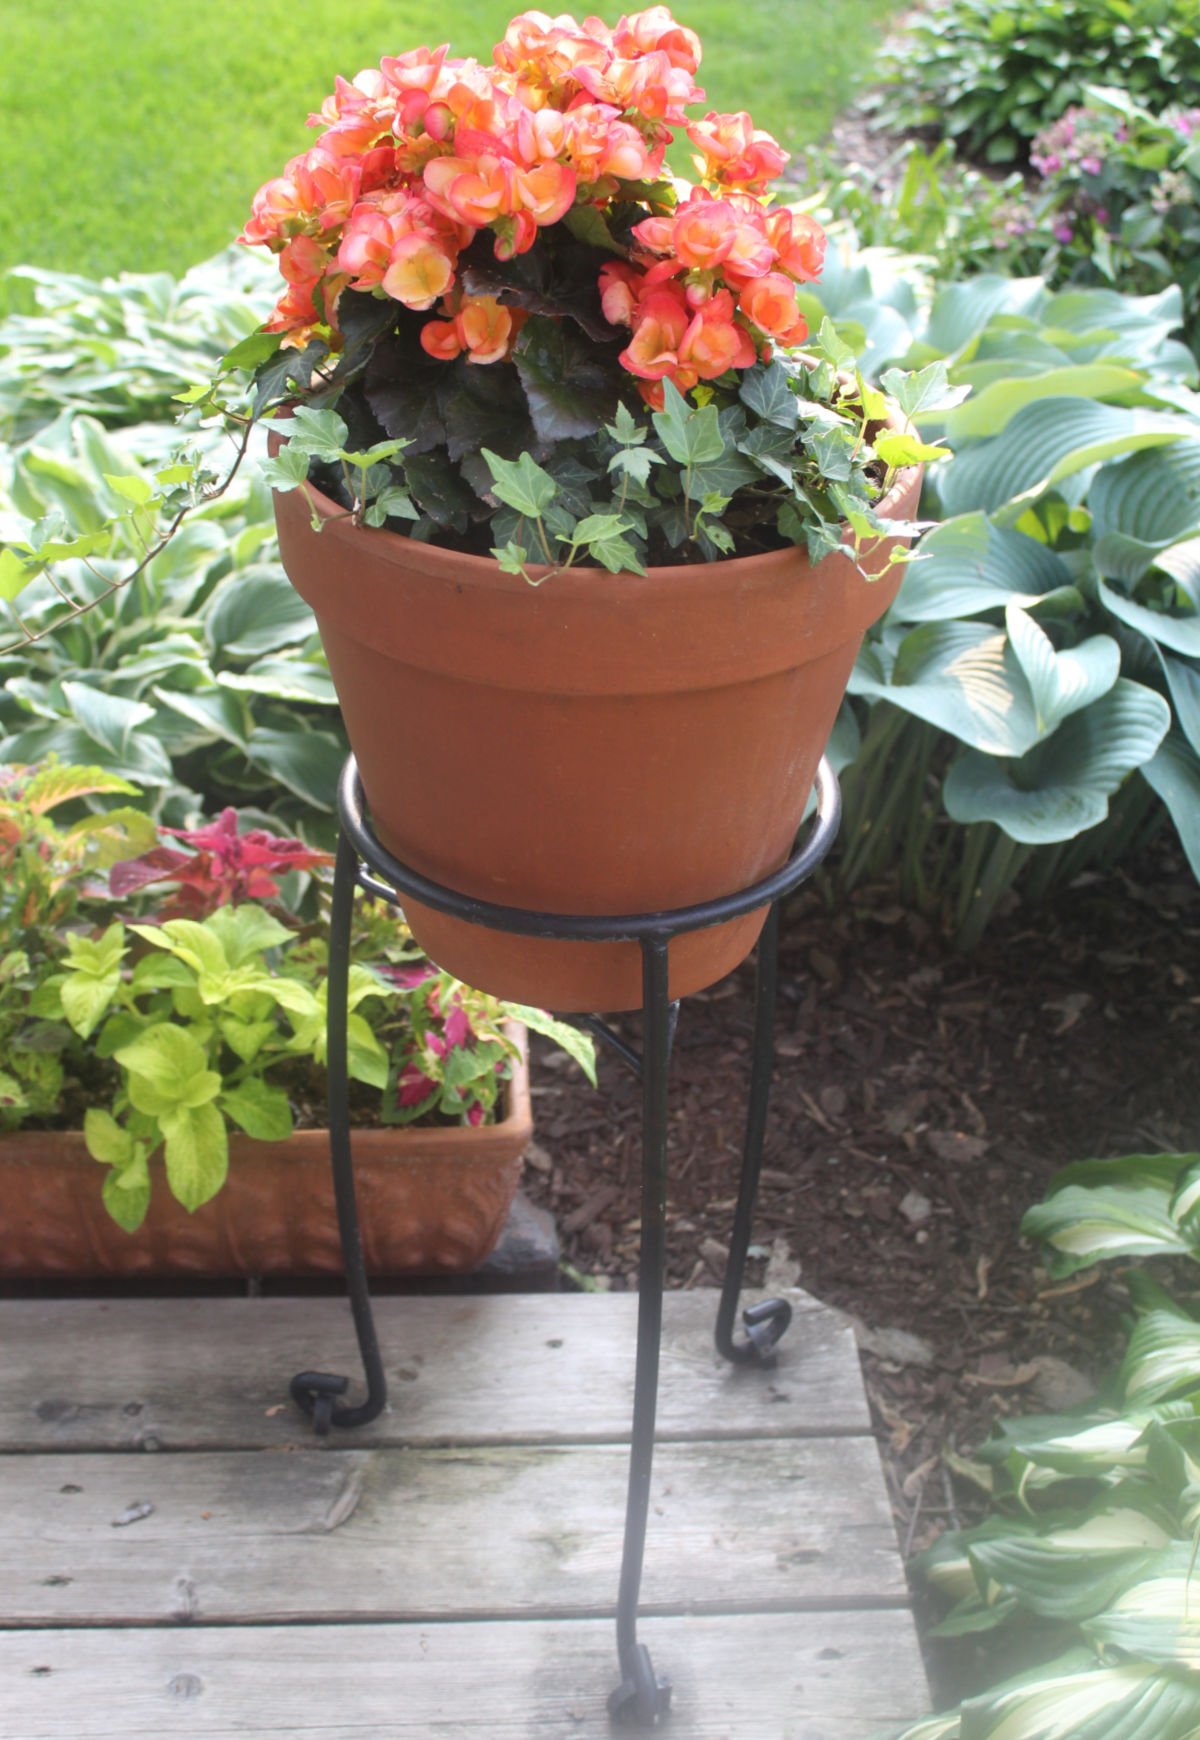 Orange begonia in a clay pot on a plant stand to create a tall planter.